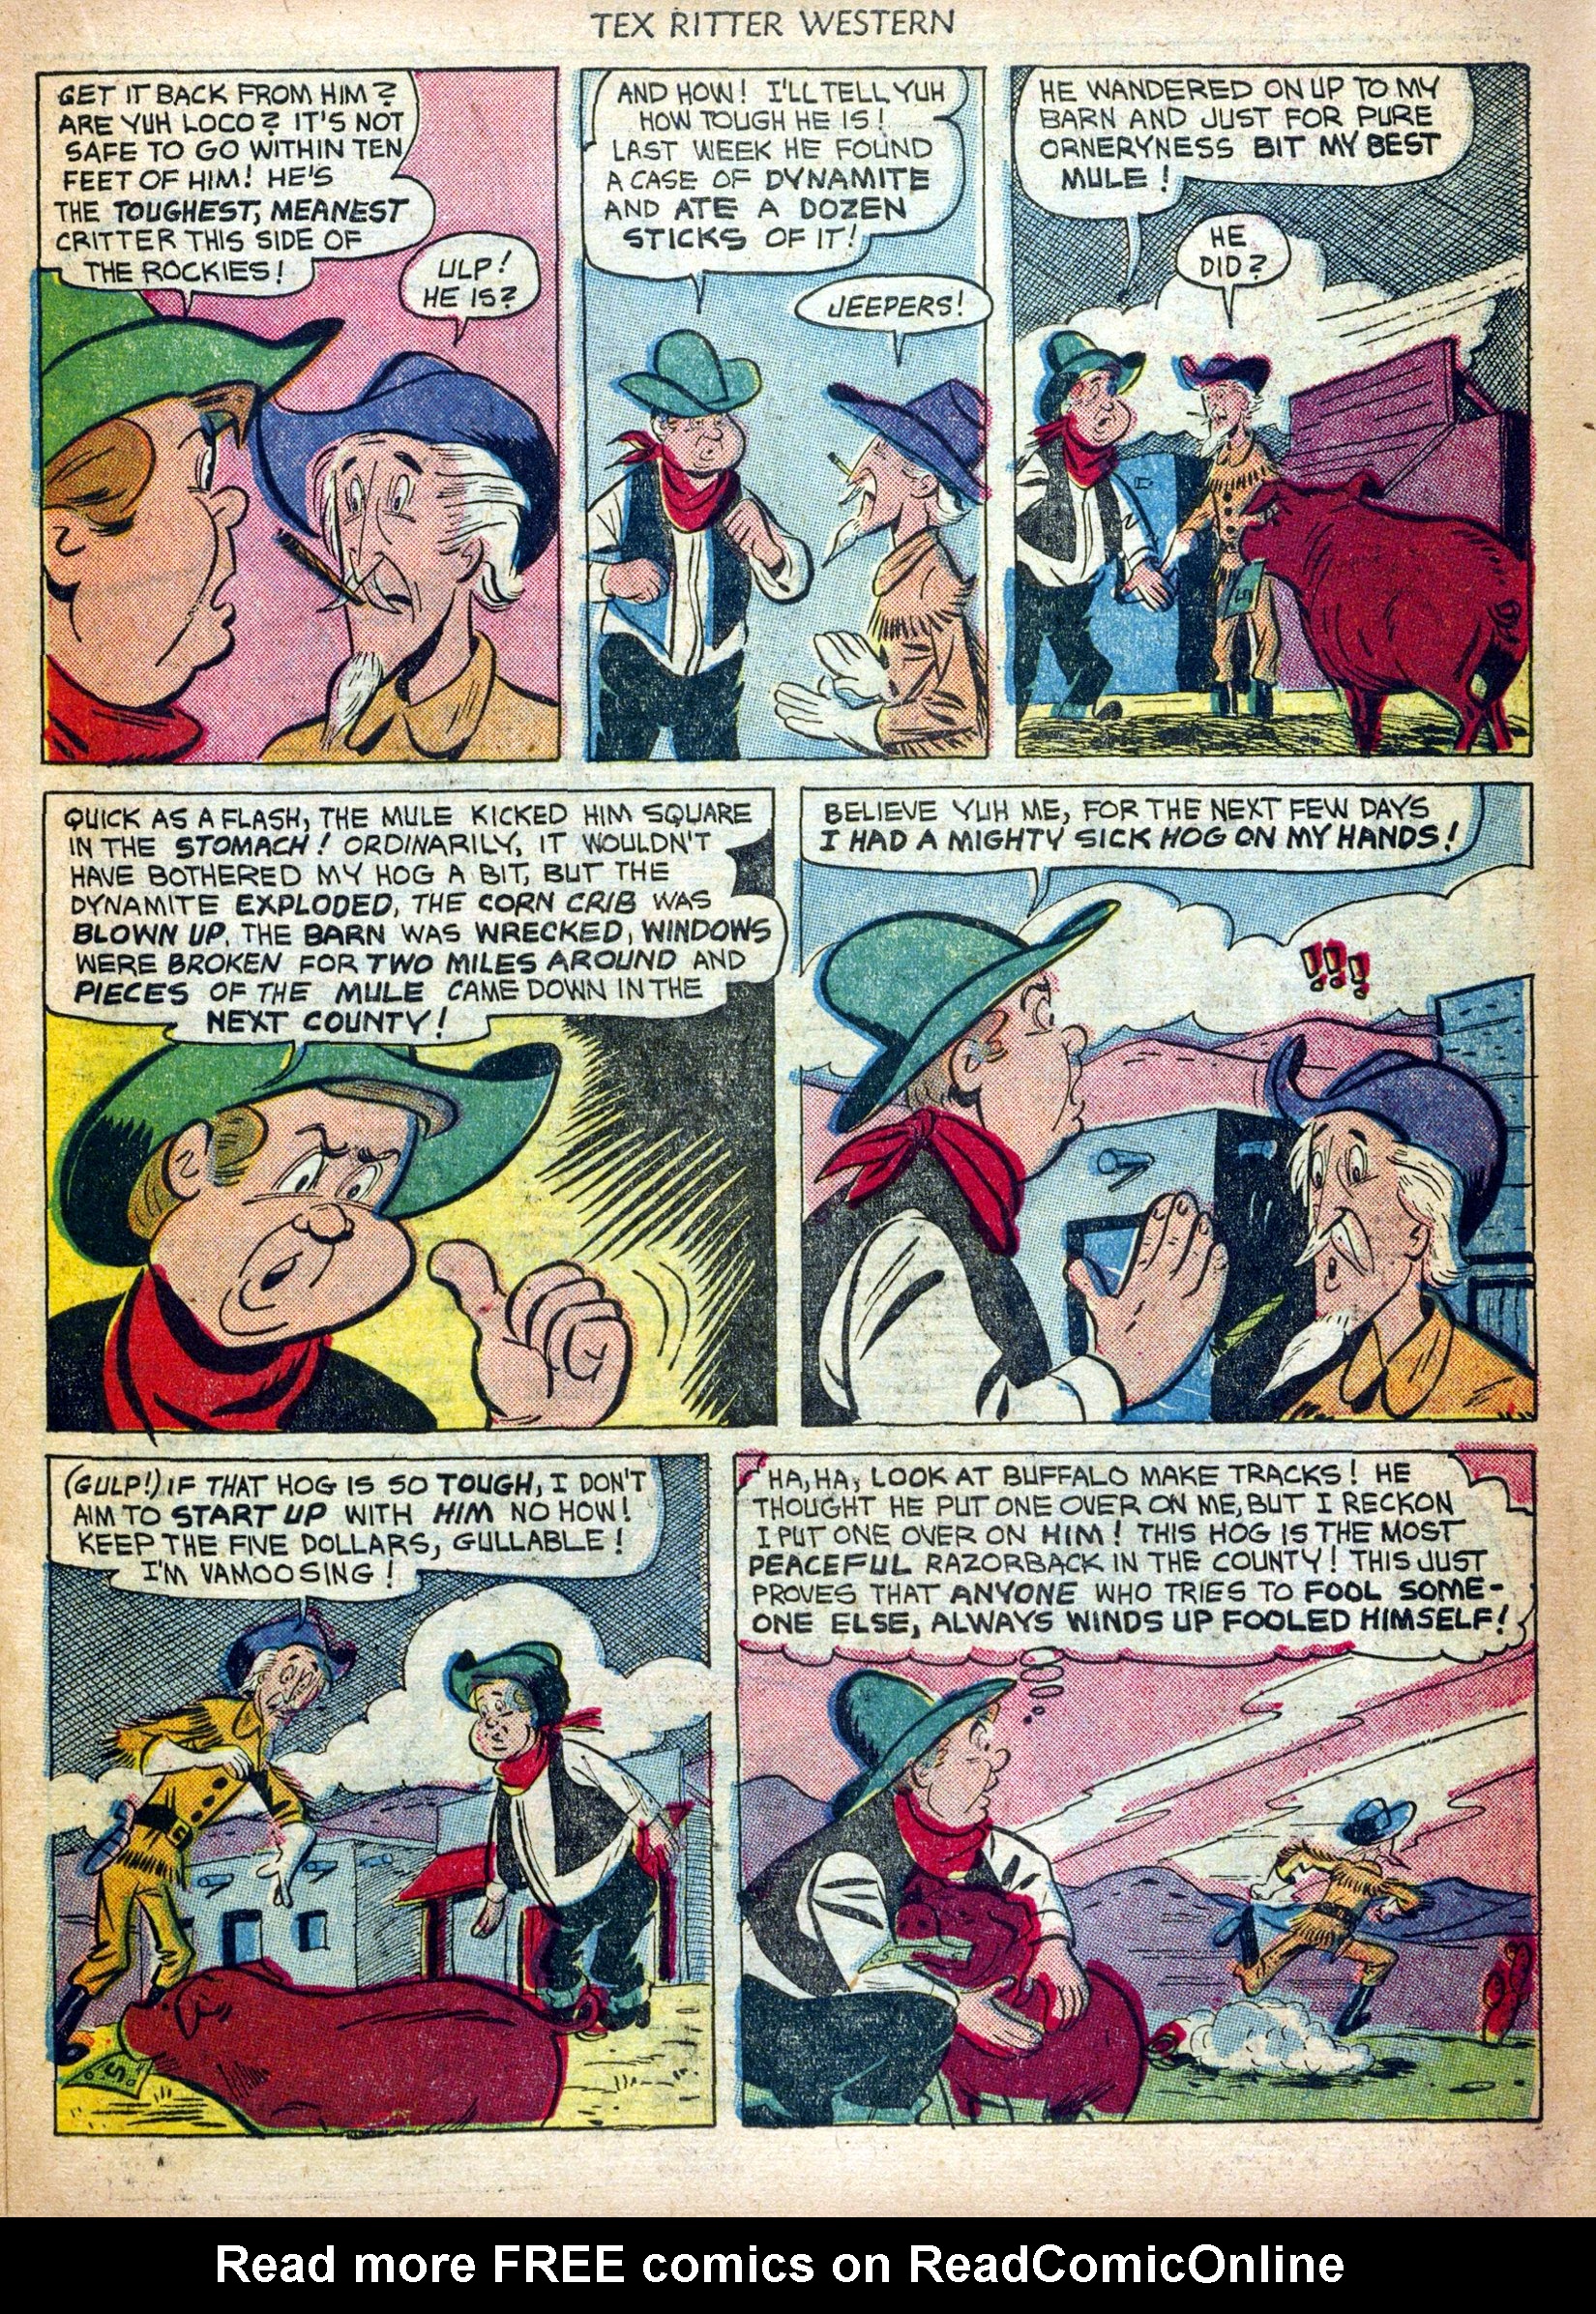 Read online Tex Ritter Western comic -  Issue #12 - 15